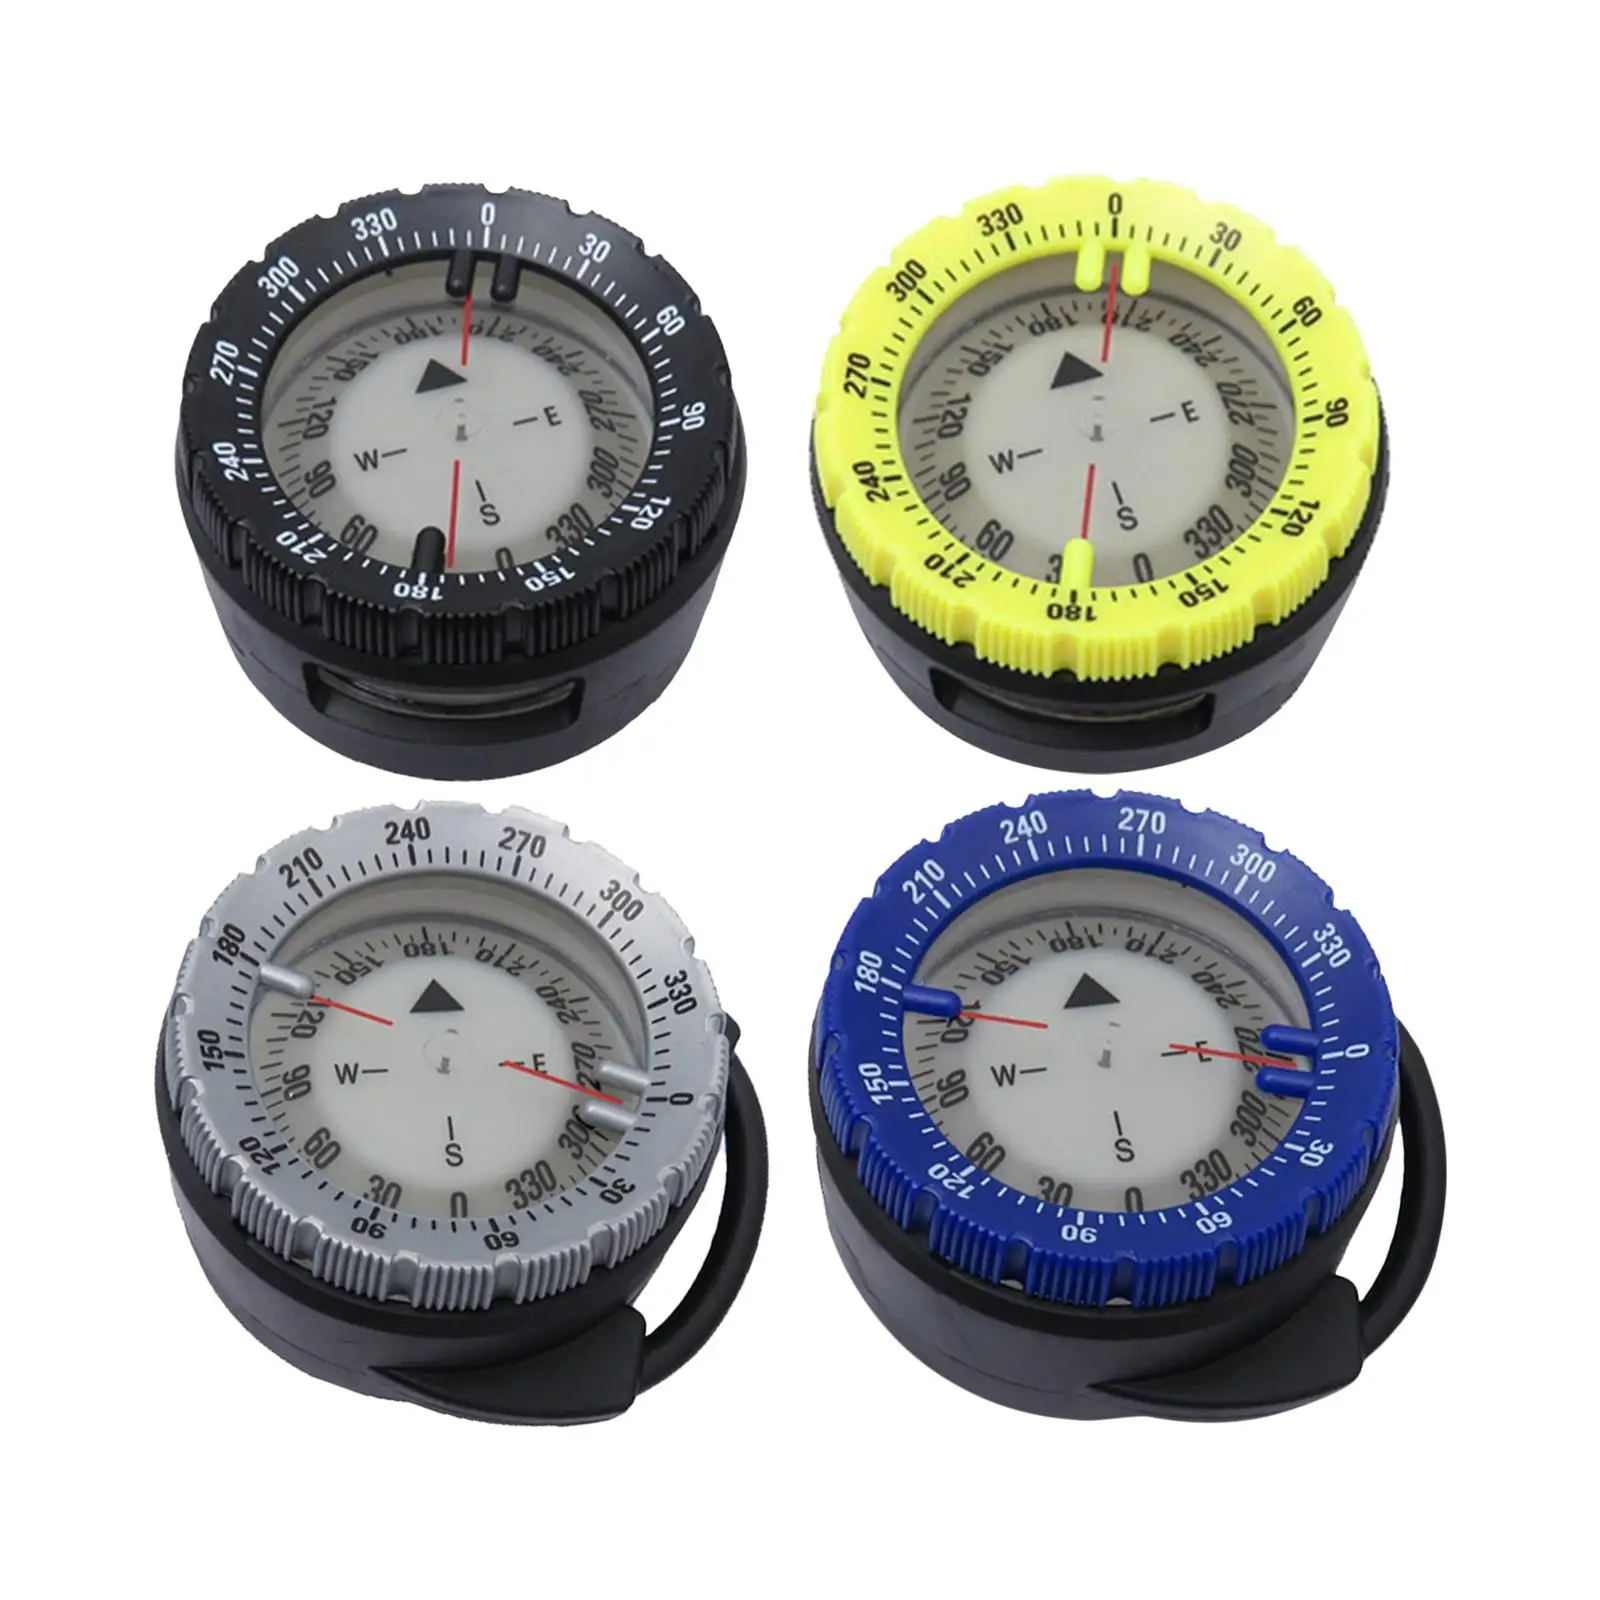 Camping Survival Compass Glow in The Dark for Hiking Outdoor Activities